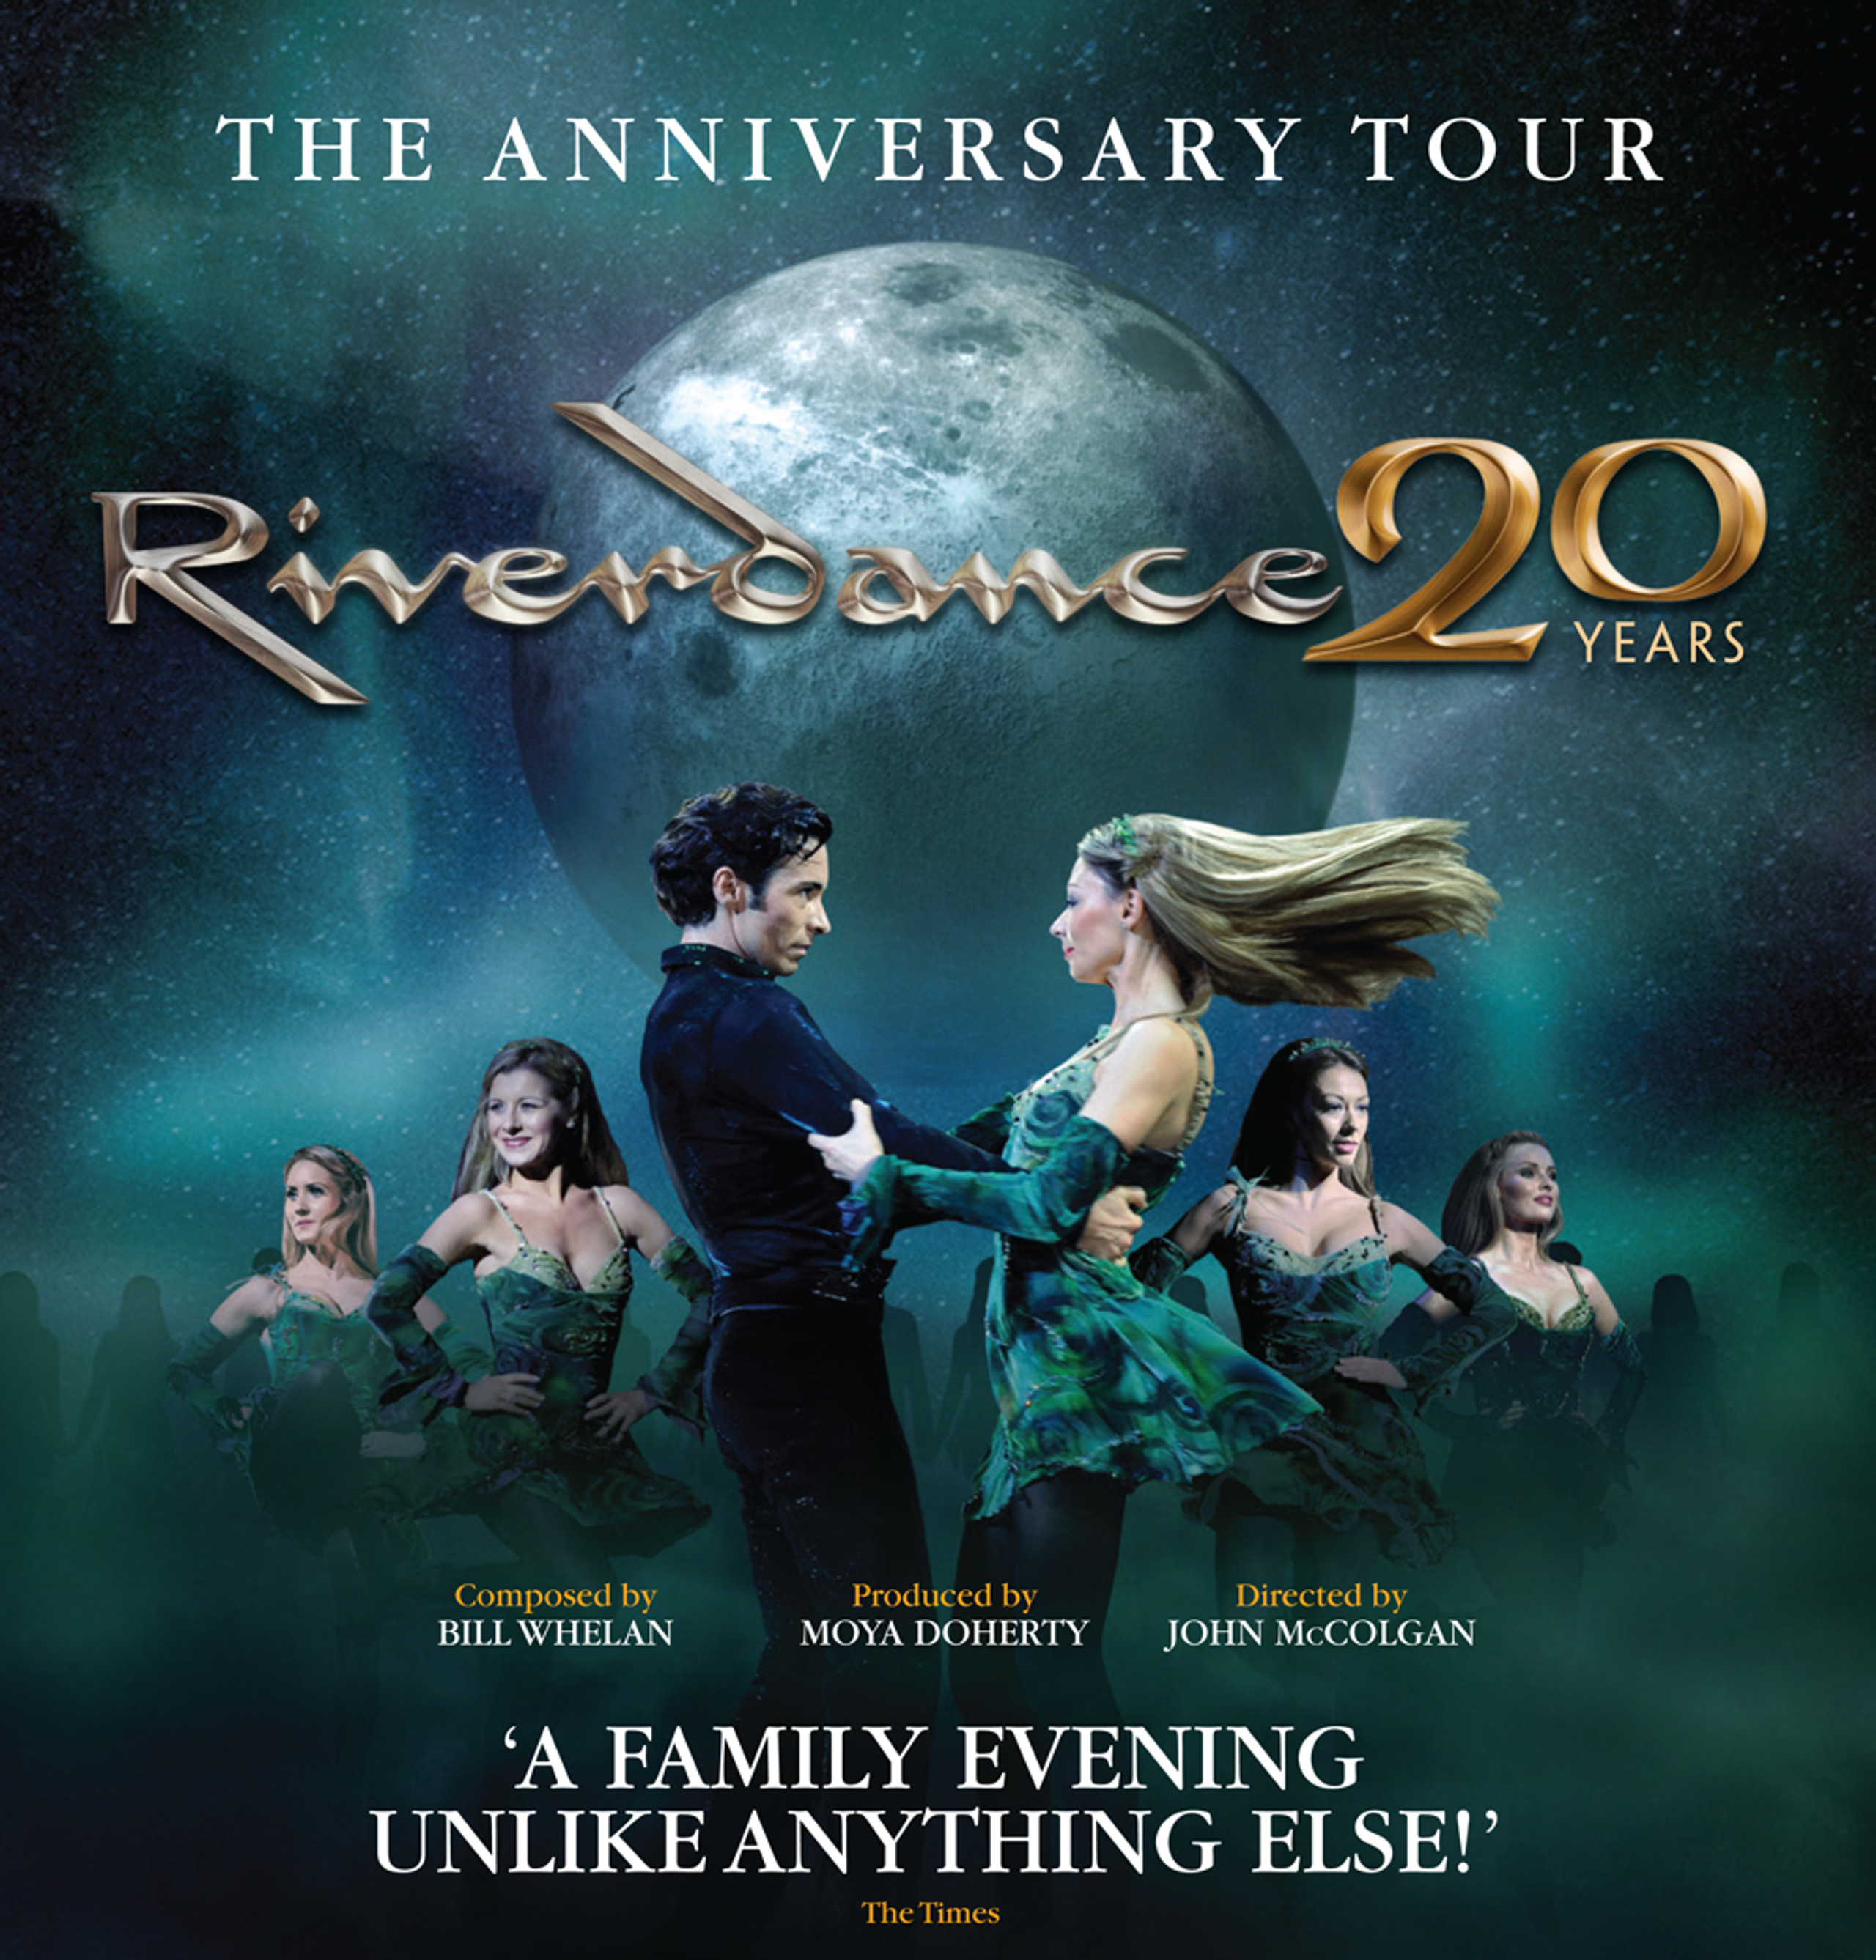 Riverdance is back with a 20th anniversary world tour. The Irish Rose